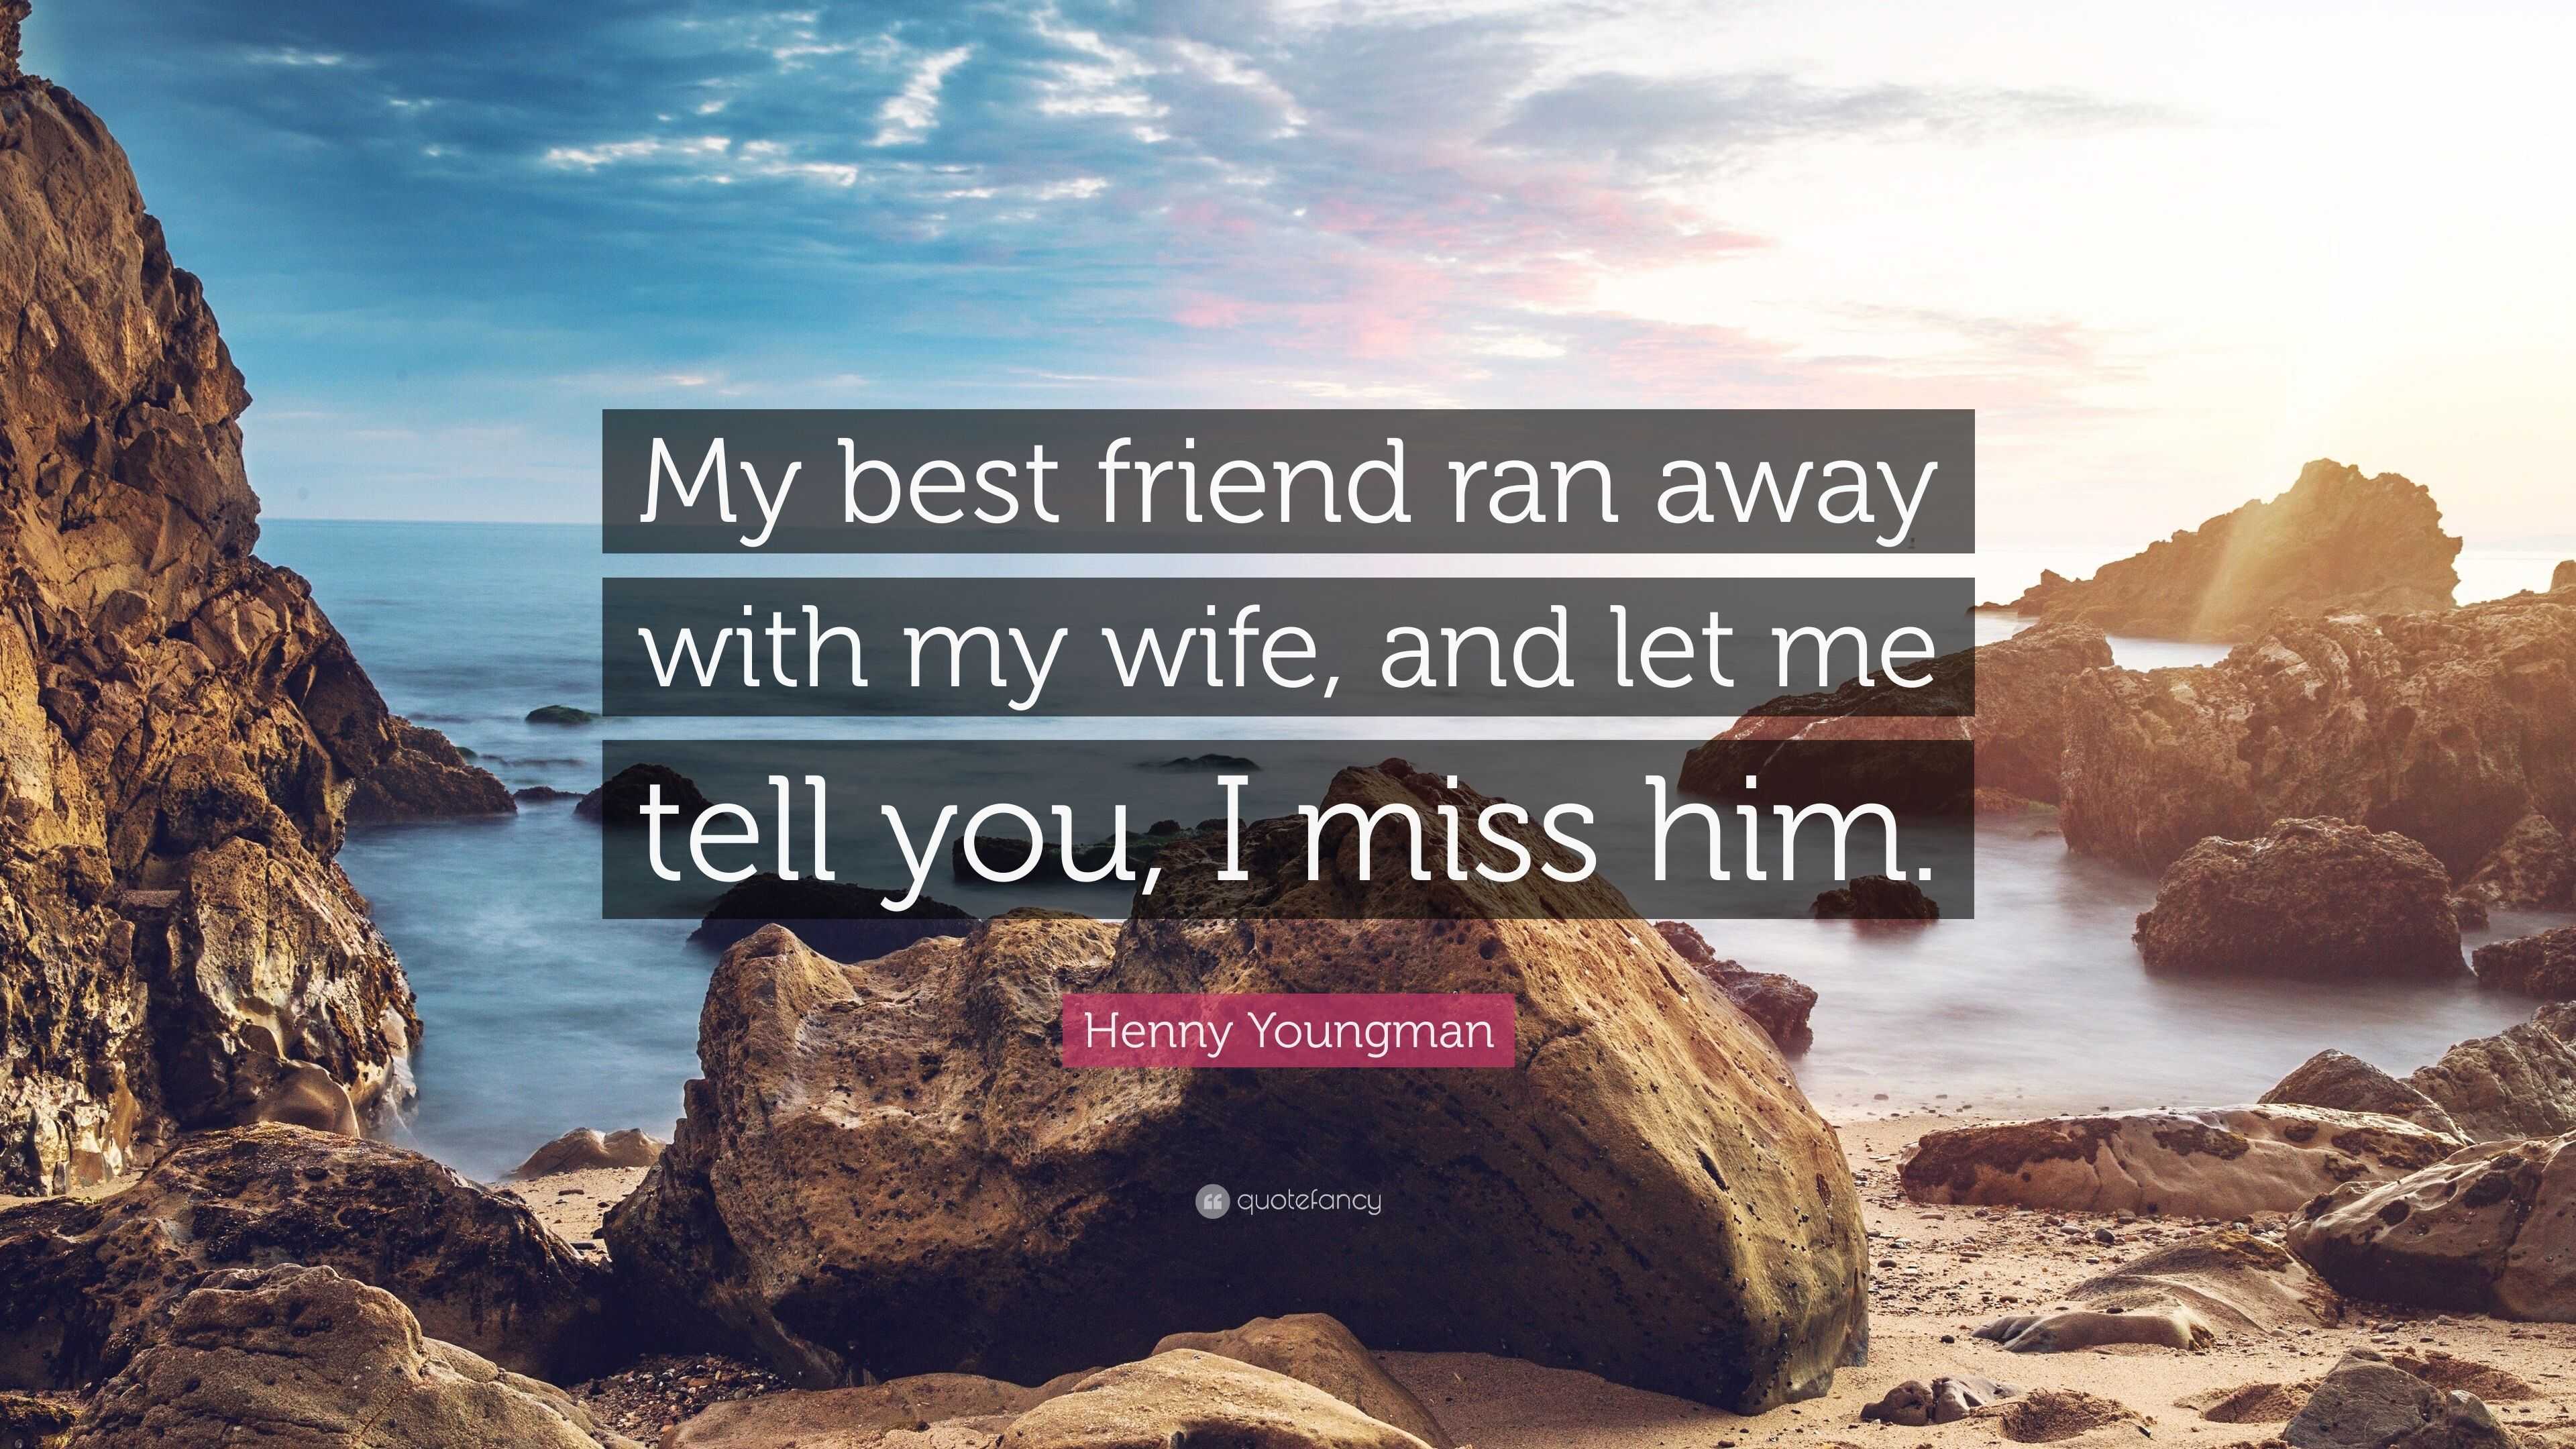 Henny Youngman Quote “My best friend